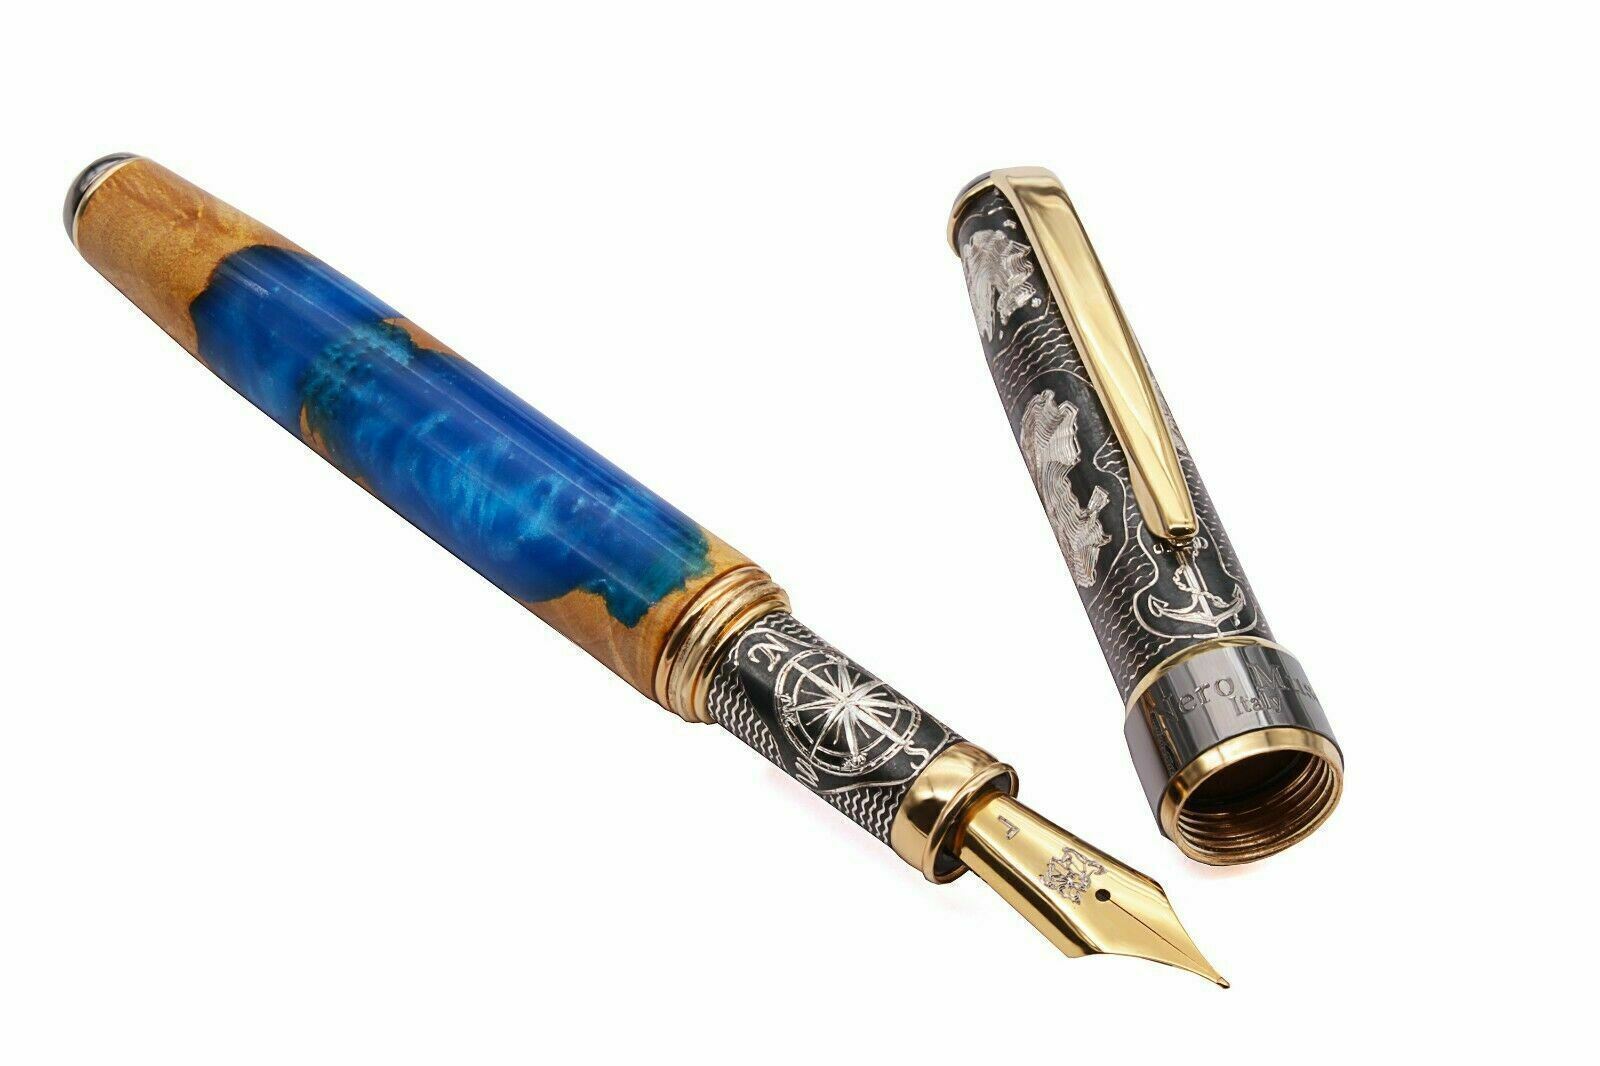 Unknown Land Fountain Pen Silver Wood and Resin Bock Medium Nib Limited Edition